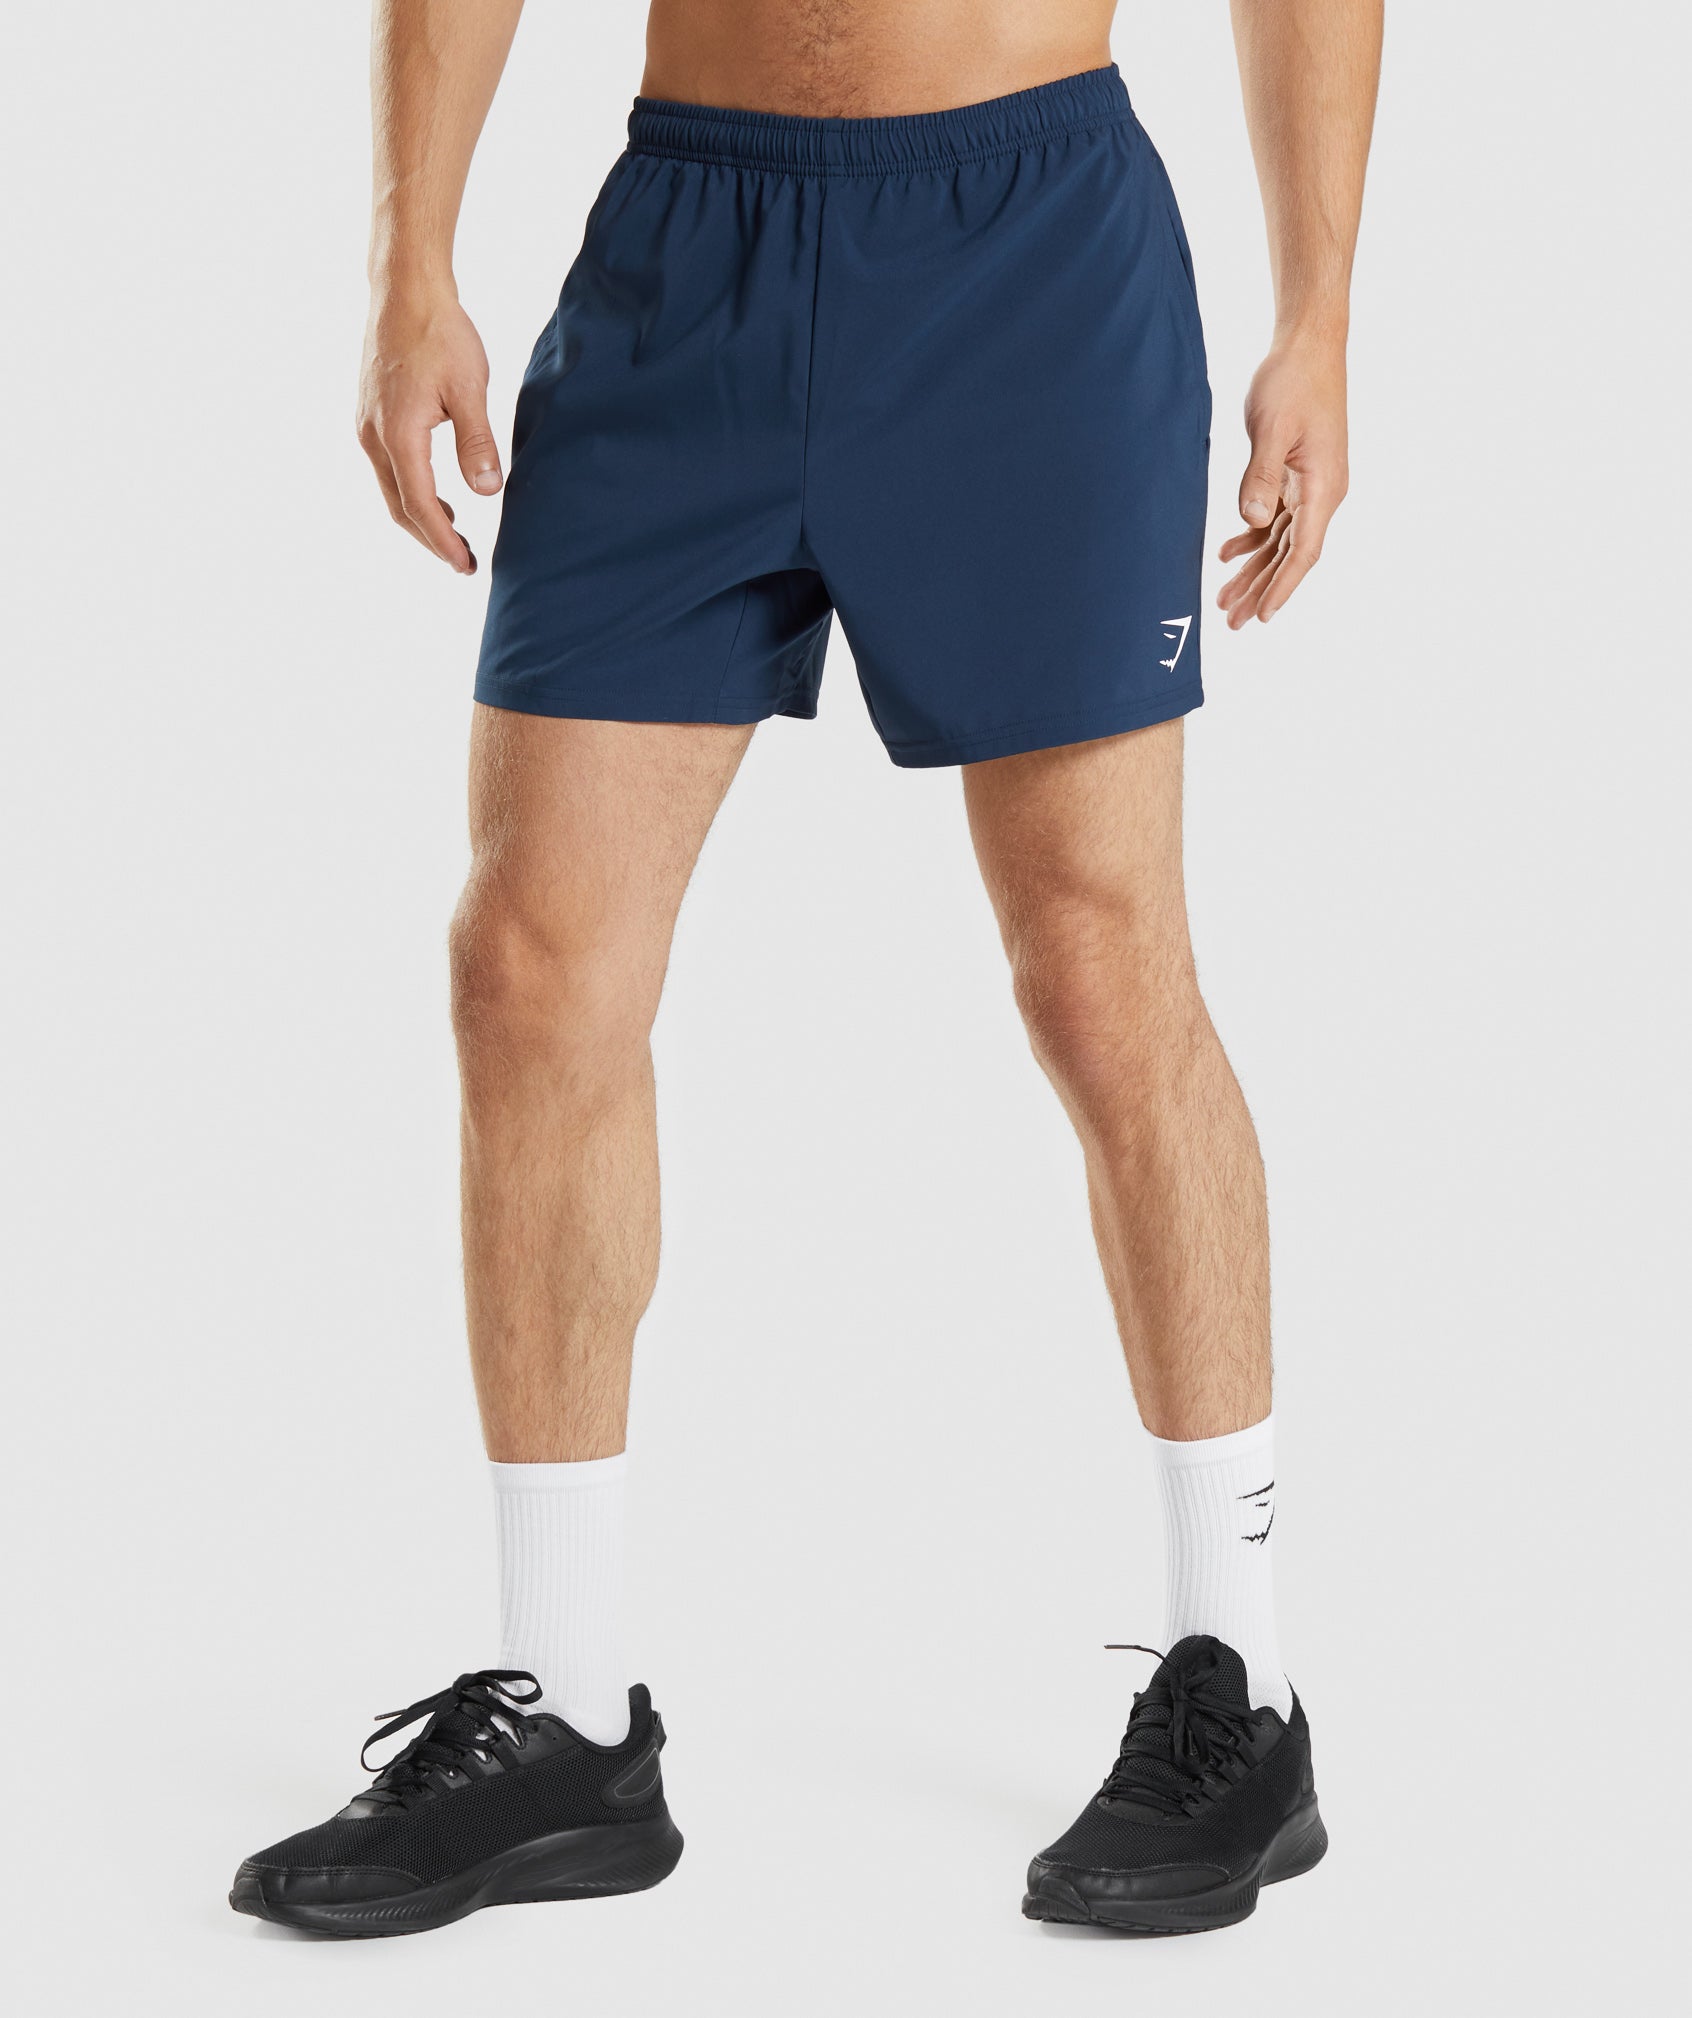 Arrival 5" Shorts in Navy